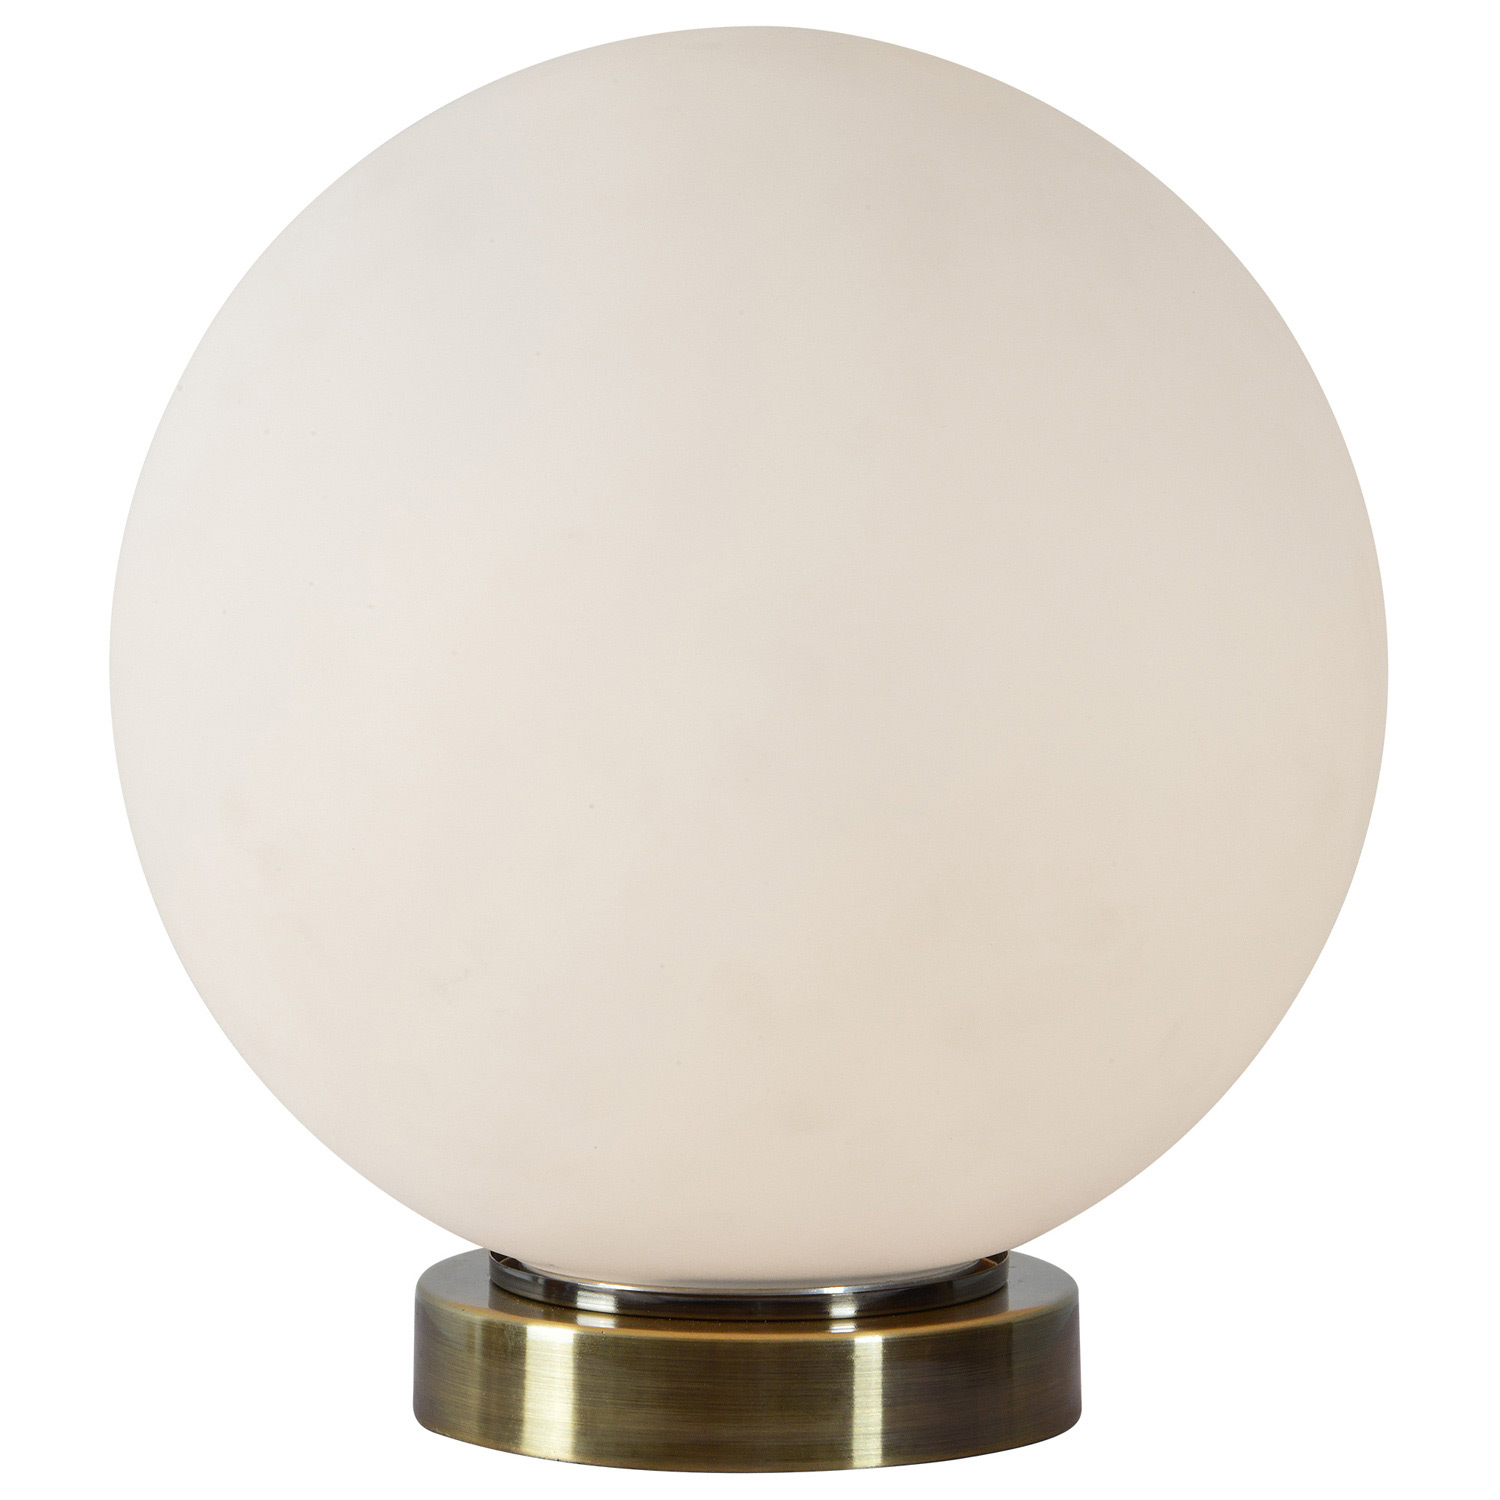 Ren-Wil Maxwell Table Lamp - Antique Brushed Brass